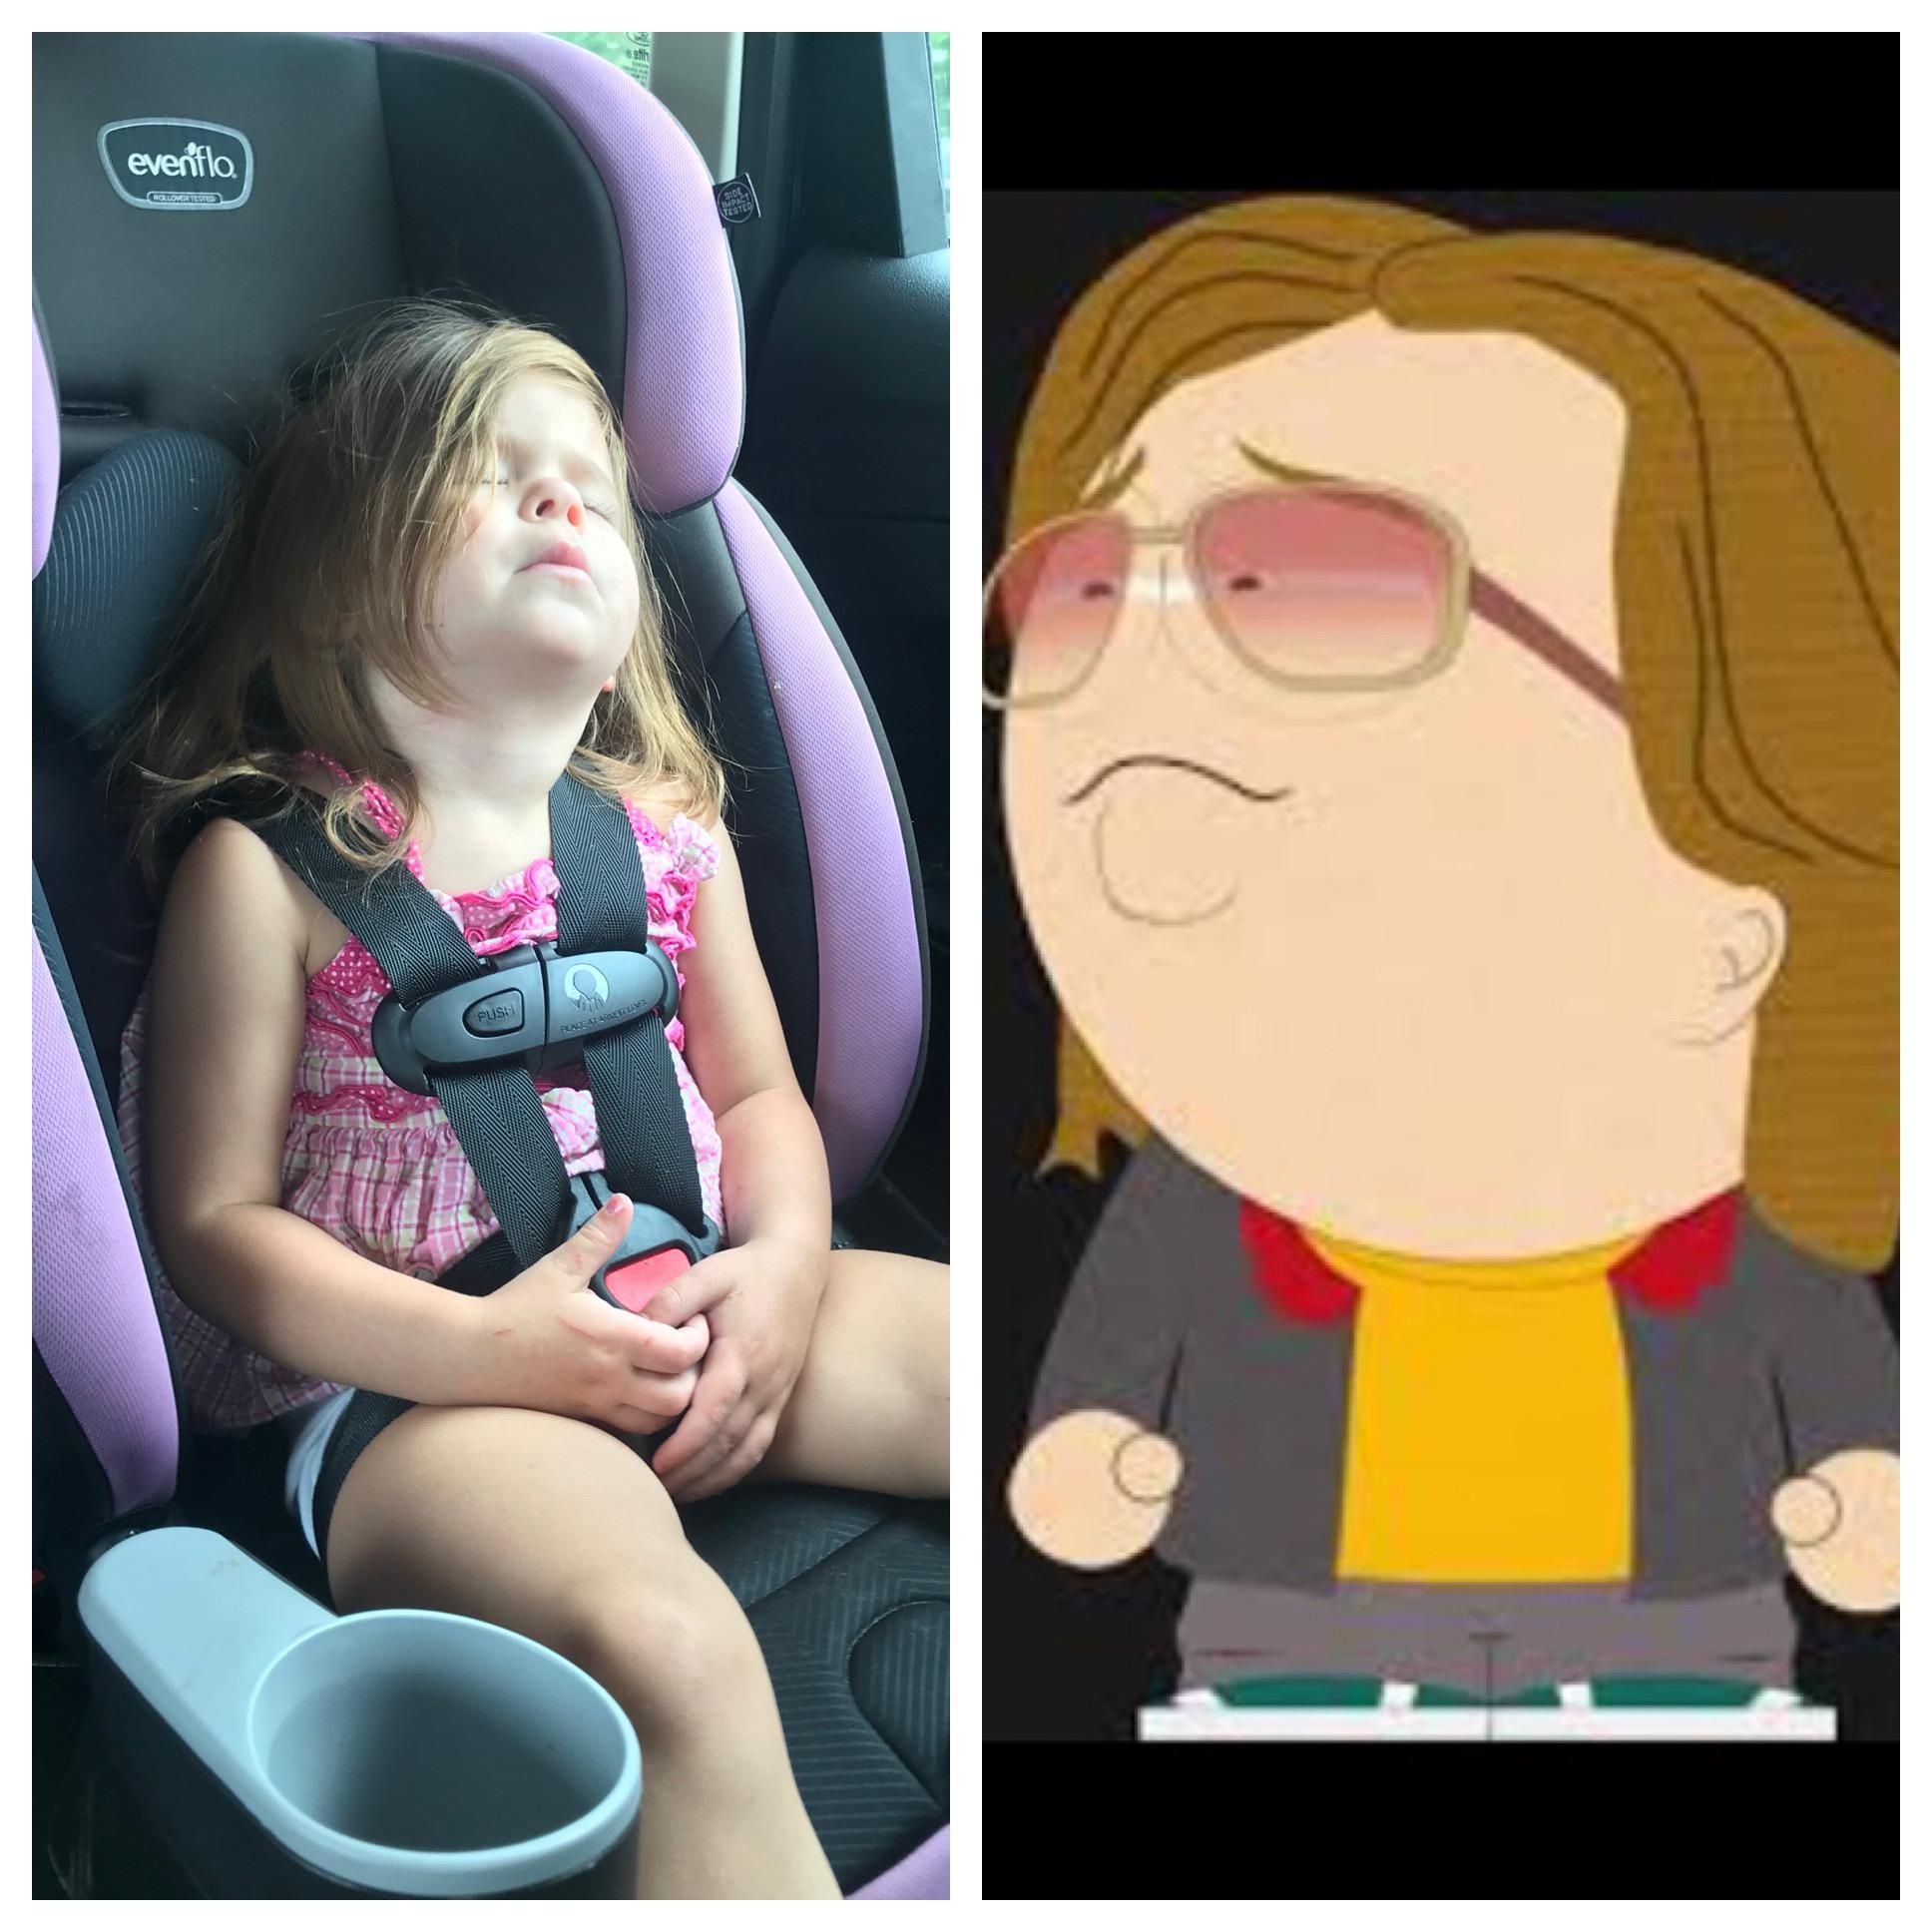 My wife said our daughter looked cute. I replied that she looks like Nathan from South Park.